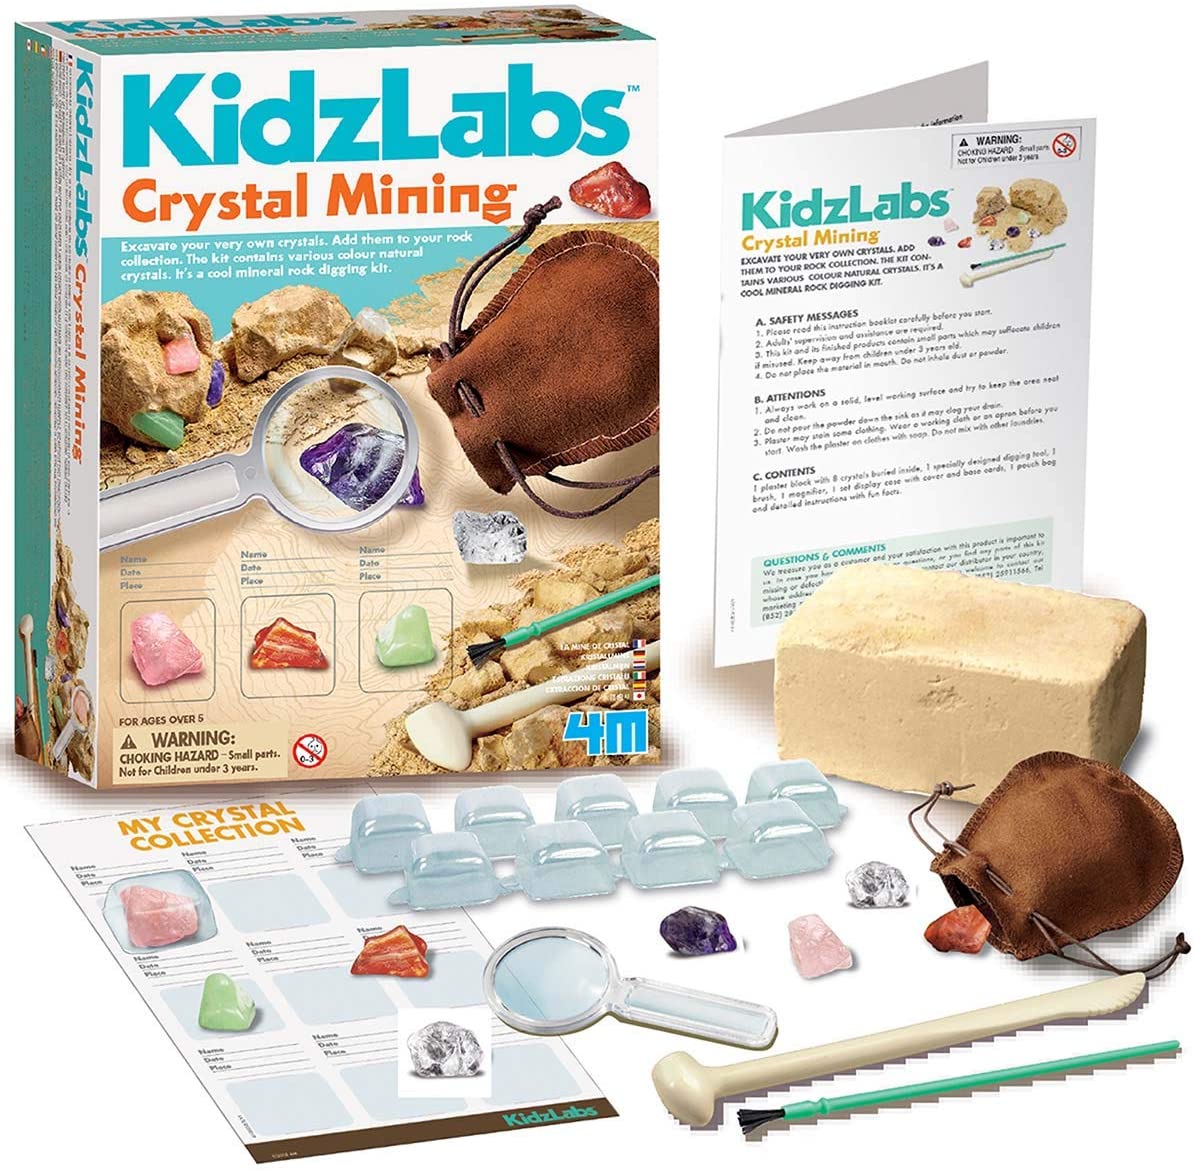 kidzlabs crystal mining kit 4m rock collection excavate educational science kit mineral hunter dig tool treasures tough plaster magnifying glass pouch display case ages 5+ geology geologist colors variety fun learning education science scientist